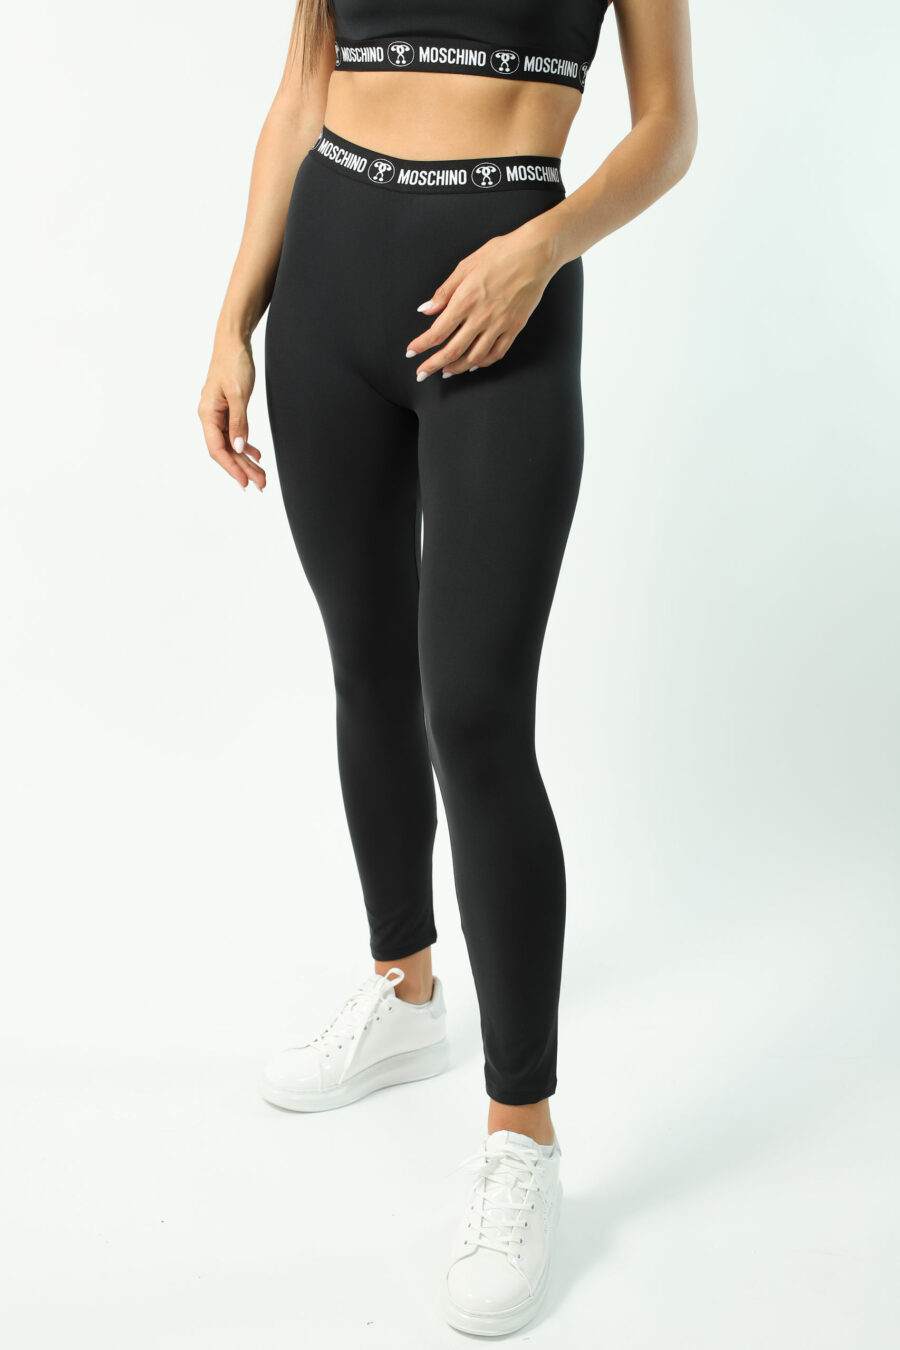 Black leggings with double question logo on tape - Photos 2951